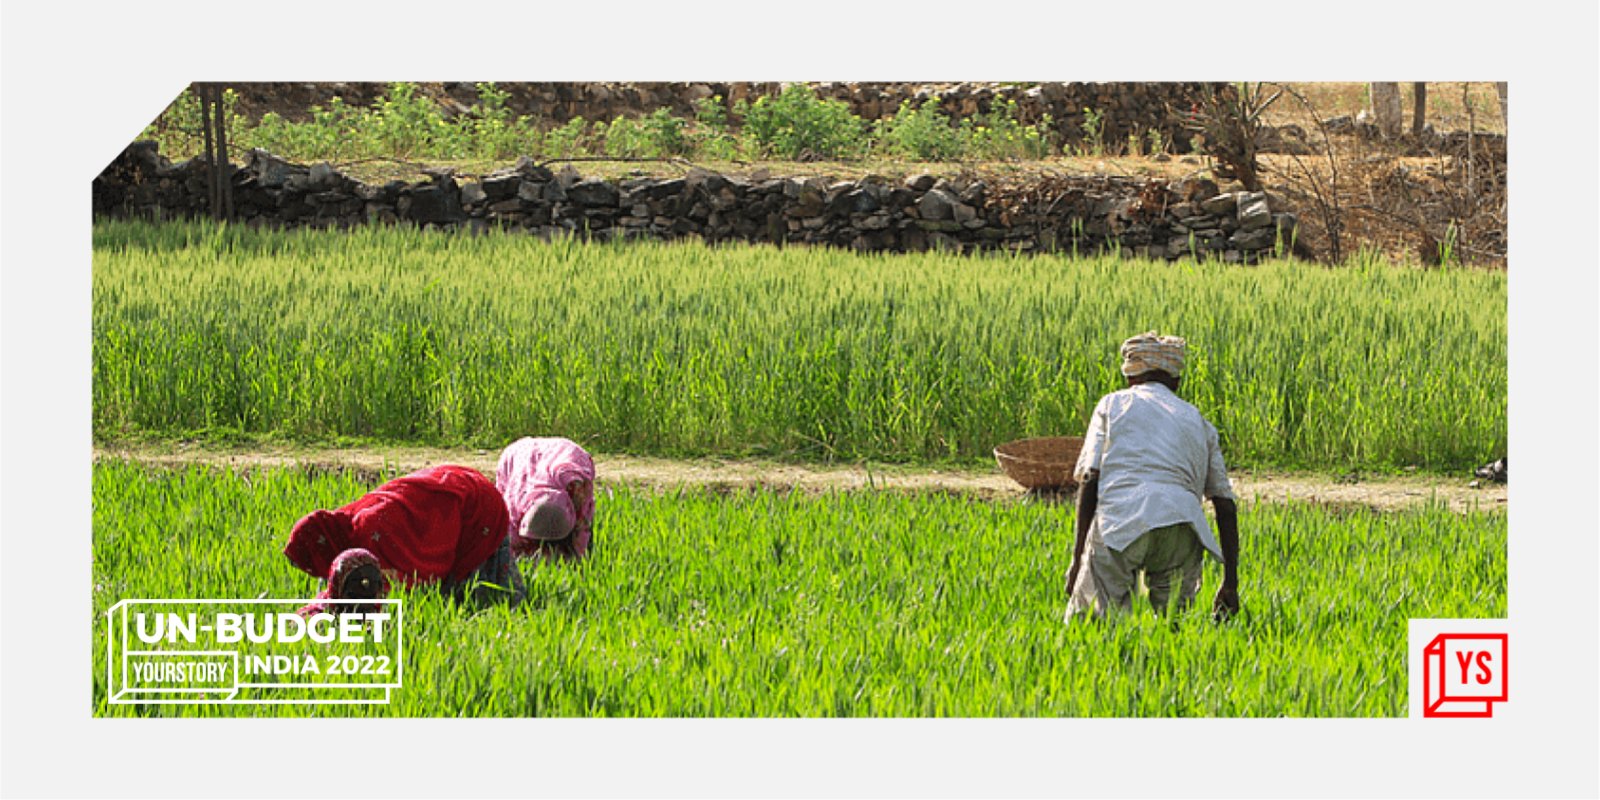 Union Budget 2022 is forward-looking for the agri-ecosystem, say experts